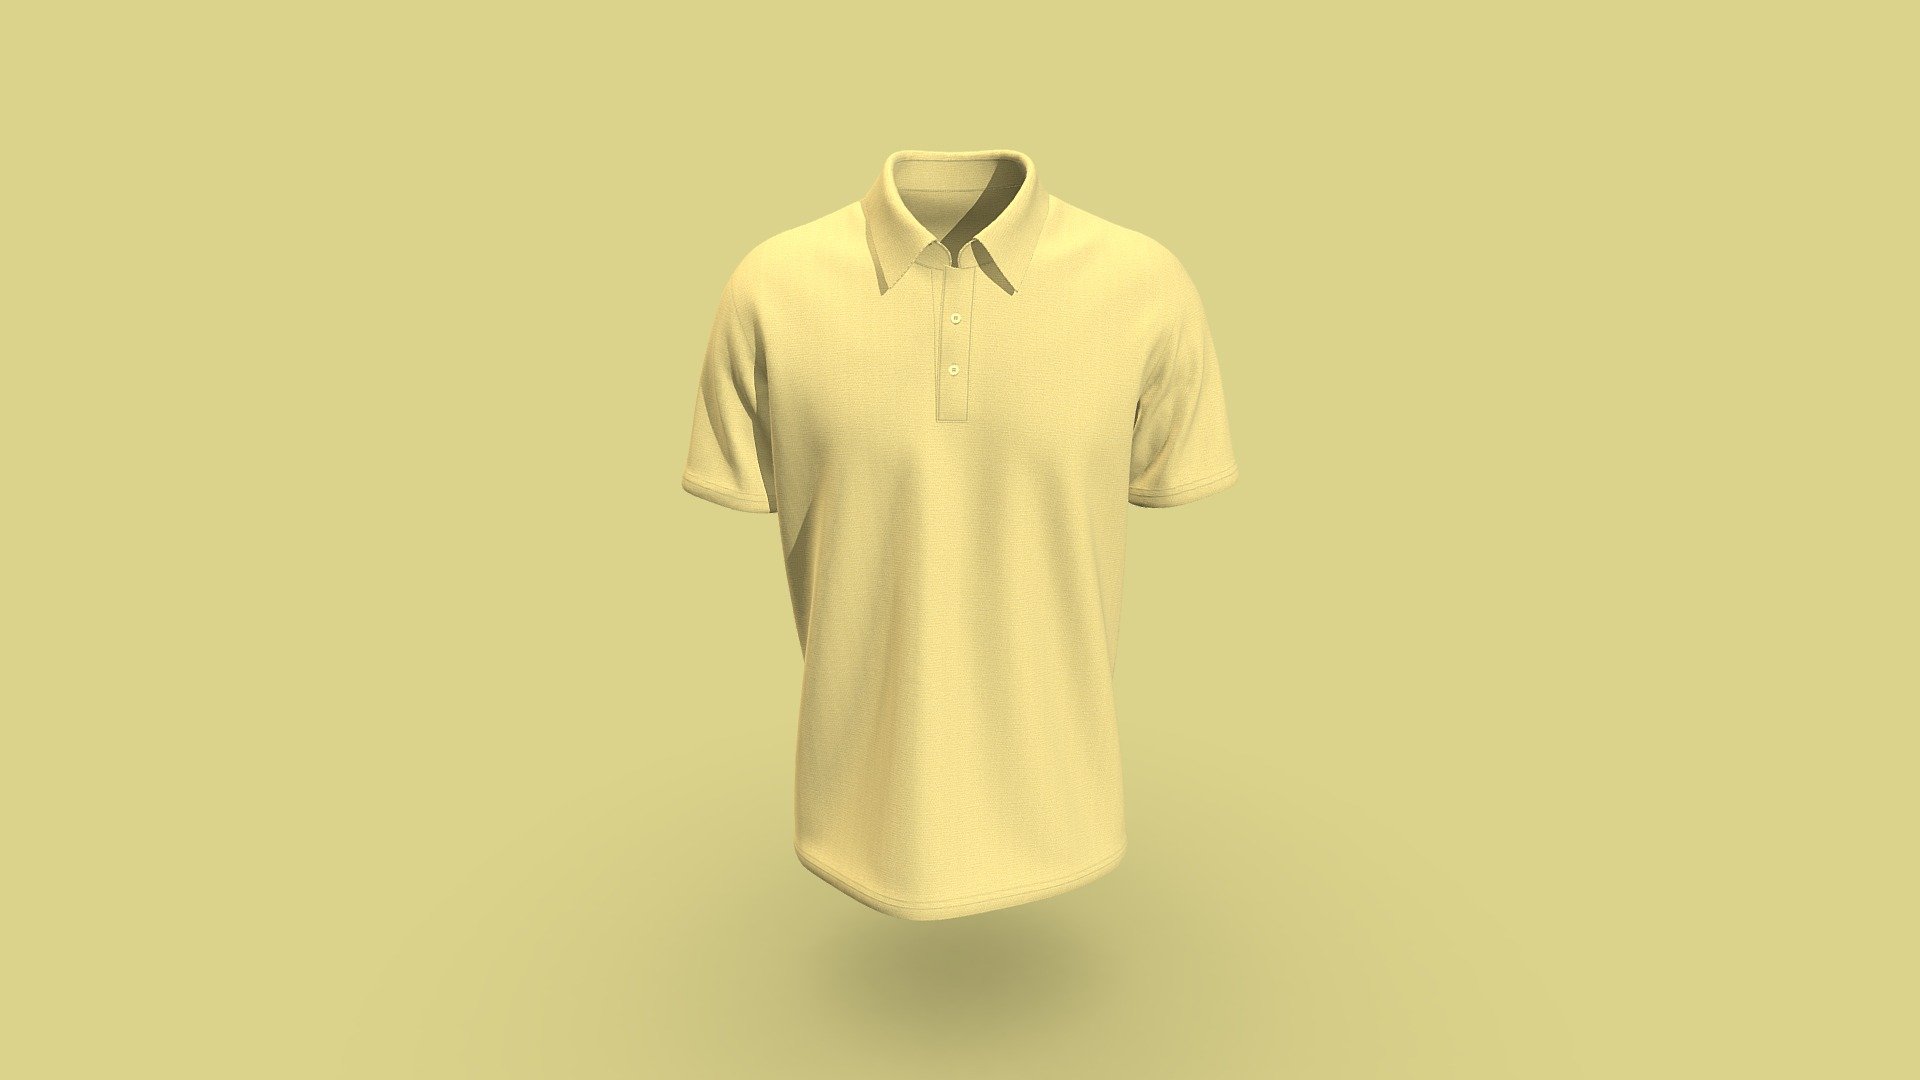 Cloth Title = New Men Stylish Polo T- Shirt 

SKU = DG100253 

Category = Men 

Product Type = Polo 

Cloth Length = Regular 

Body Fit = Relaxed Fit 

Occasion = Casual  

Sleeve Style = Short Sleeve 


Our Services:

3D Apparel Design.

OBJ,FBX,GLTF Making with High/Low Poly.

Fabric Digitalization.

Mockup making.

3D Teck Pack.

Pattern Making.

2D Illustration.

Cloth Animation and 360 Spin Video.


Contact us:- 

Email: info@digitalfashionwear.com 

Website: https://digitalfashionwear.com 


We designed all the types of cloth specially focused on product visualization, e-commerce, fitting, and production. 

We will design: 

T-shirts 

Polo shirts 

Hoodies 

Sweatshirt 

Jackets 

Shirts 

TankTops 

Trousers 

Bras 

Underwear 

Blazer 

Aprons 

Leggings 

and All Fashion items. 





Our goal is to make sure what we provide you, meets your demand 3d model